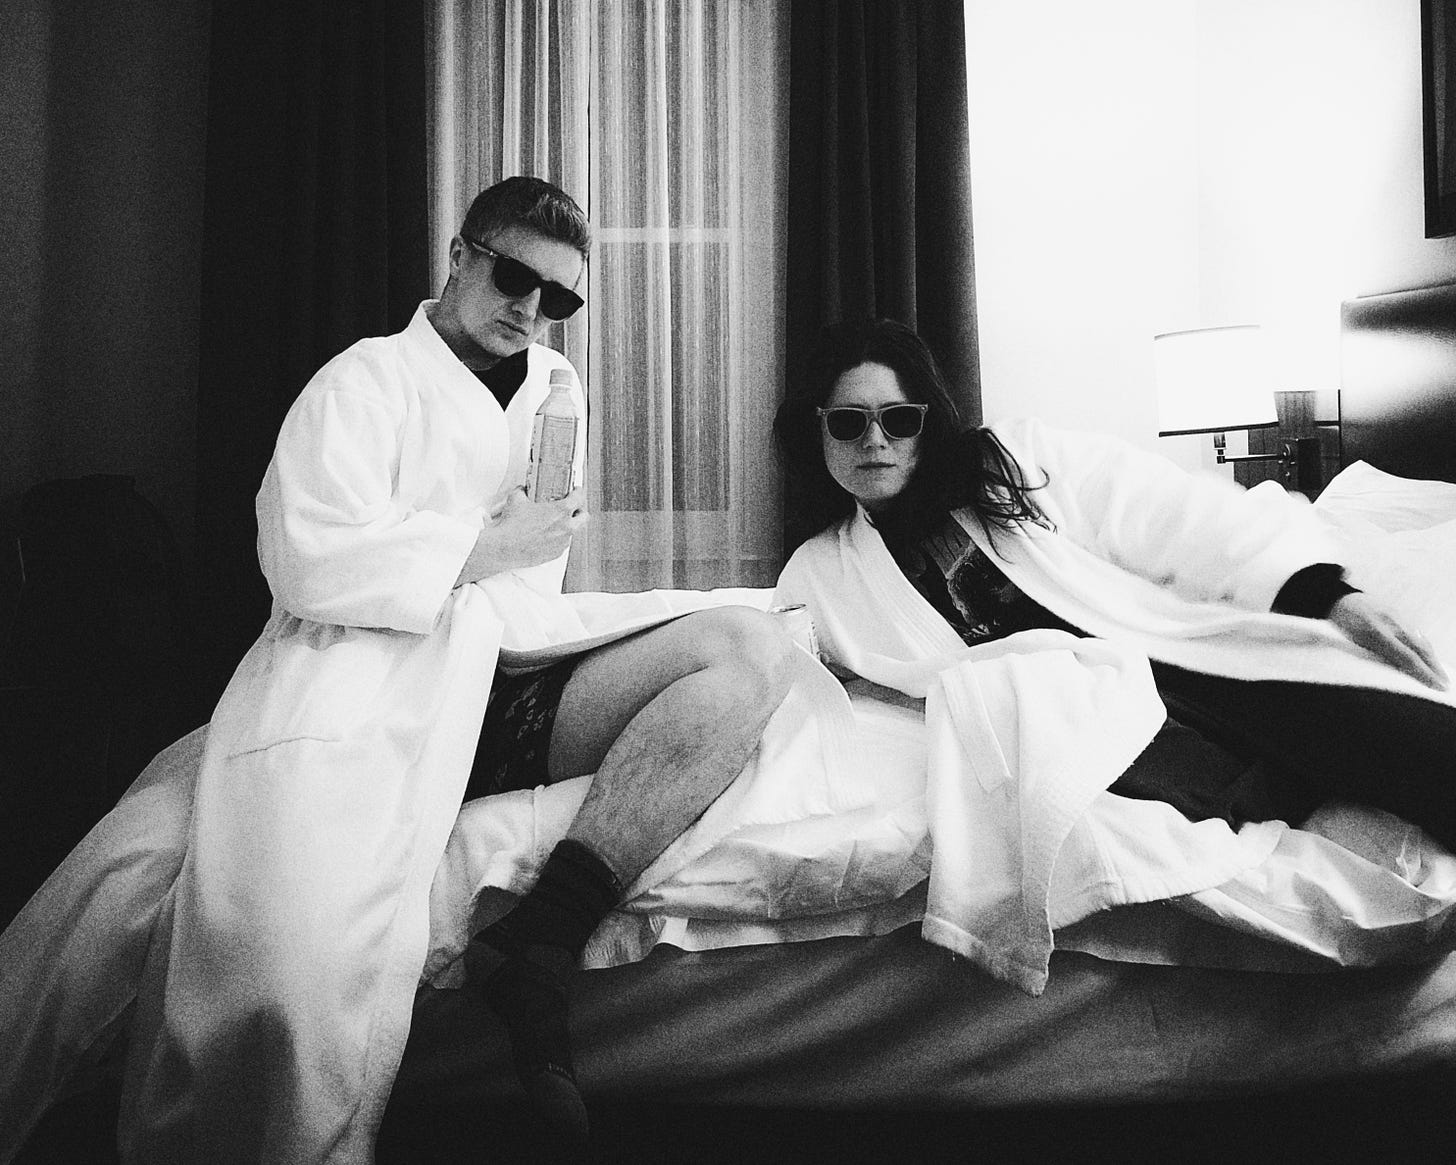 Black and white photo of Emily and Meg, both wearing sunglasses and serious faces, lounging on a hotel bed while dressed in fluffy white robes.